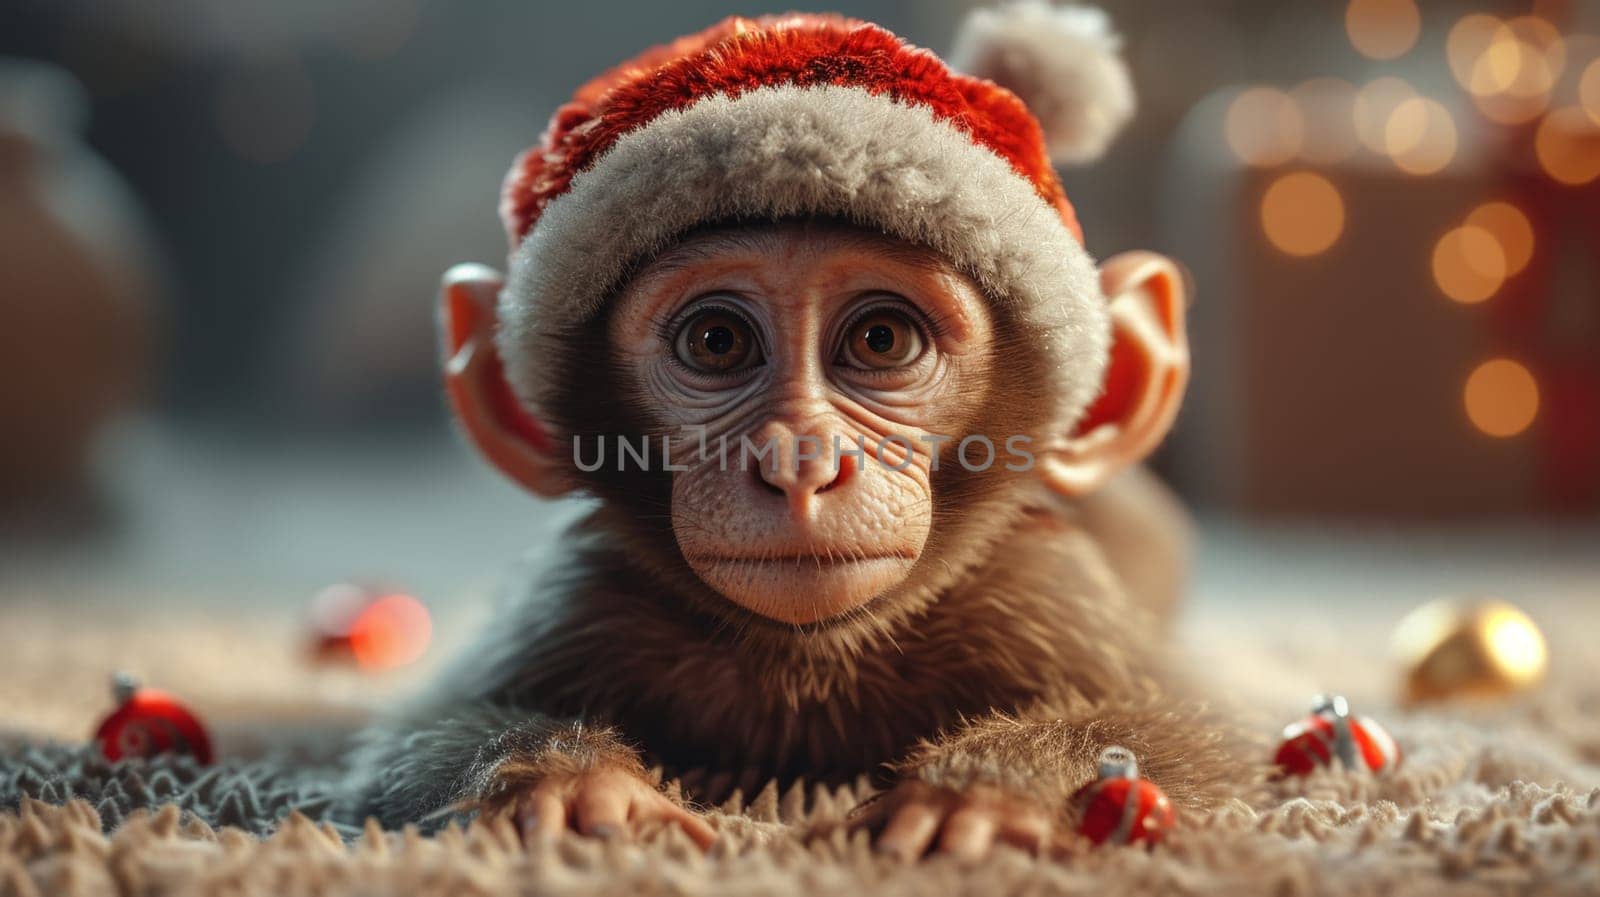 Funny monkey in a warm hat sitting in a home interior by Lobachad